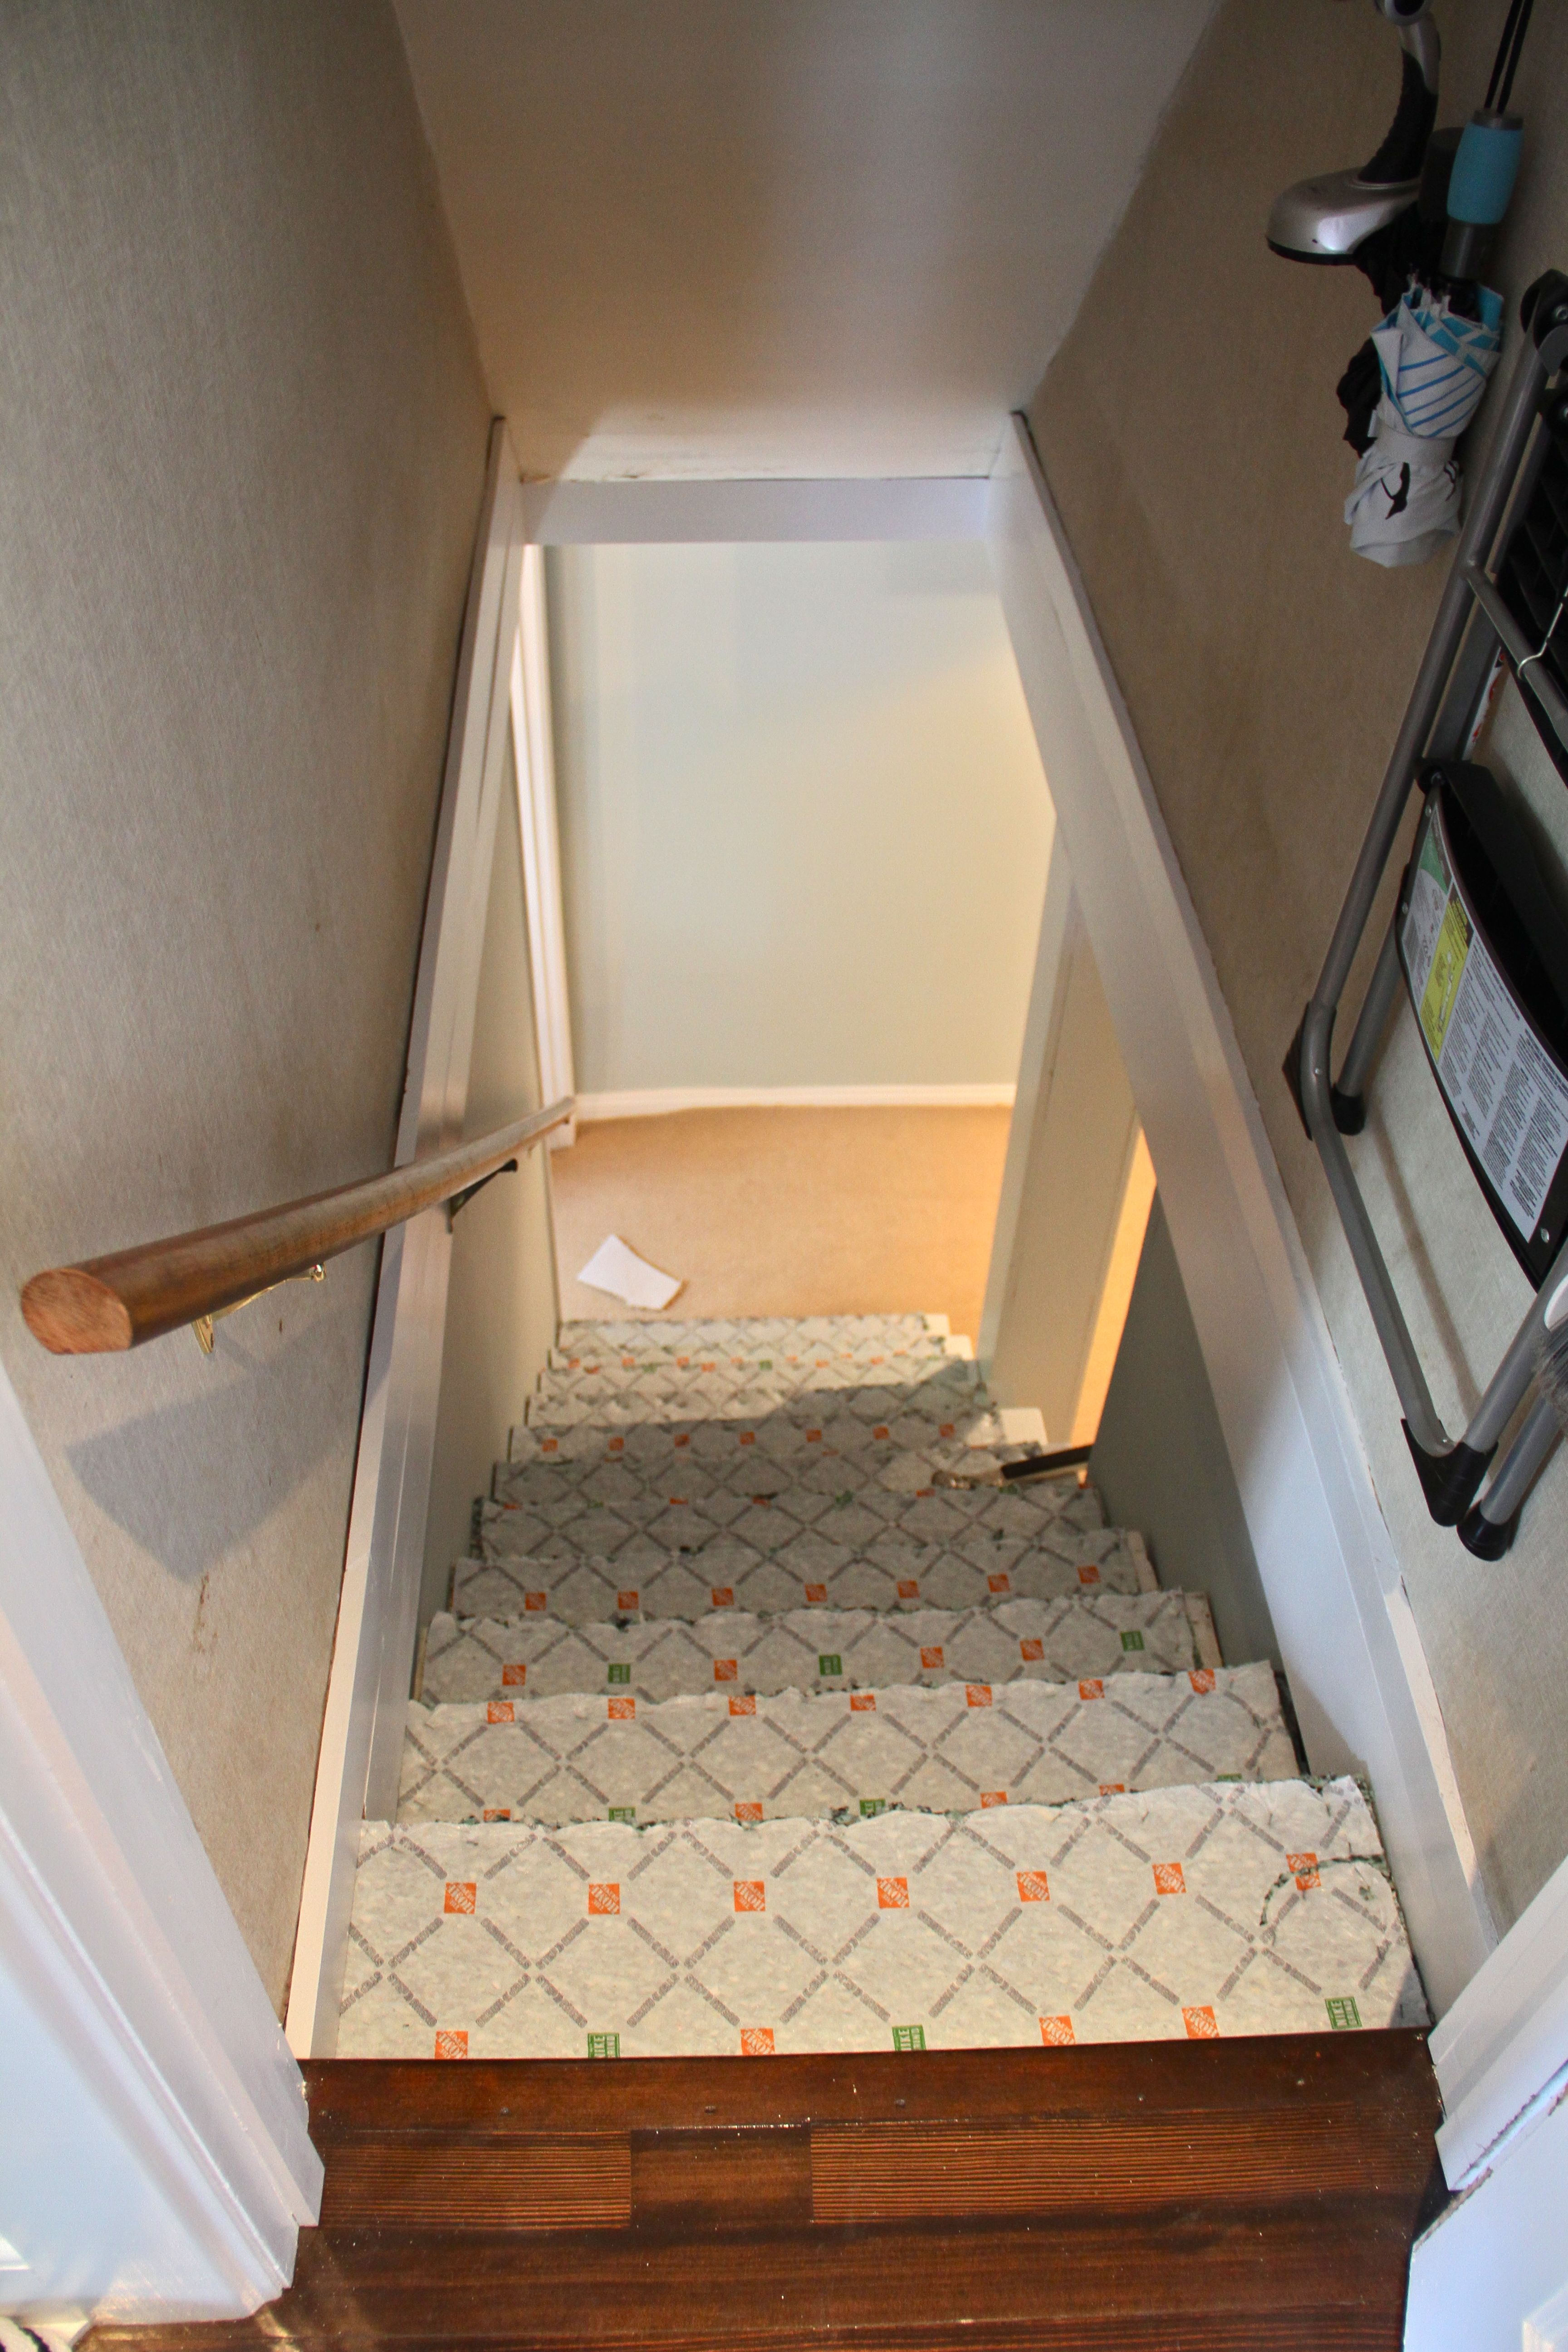 DURING: I was excited when I could already see carpeting going down at the foot of the stairs.